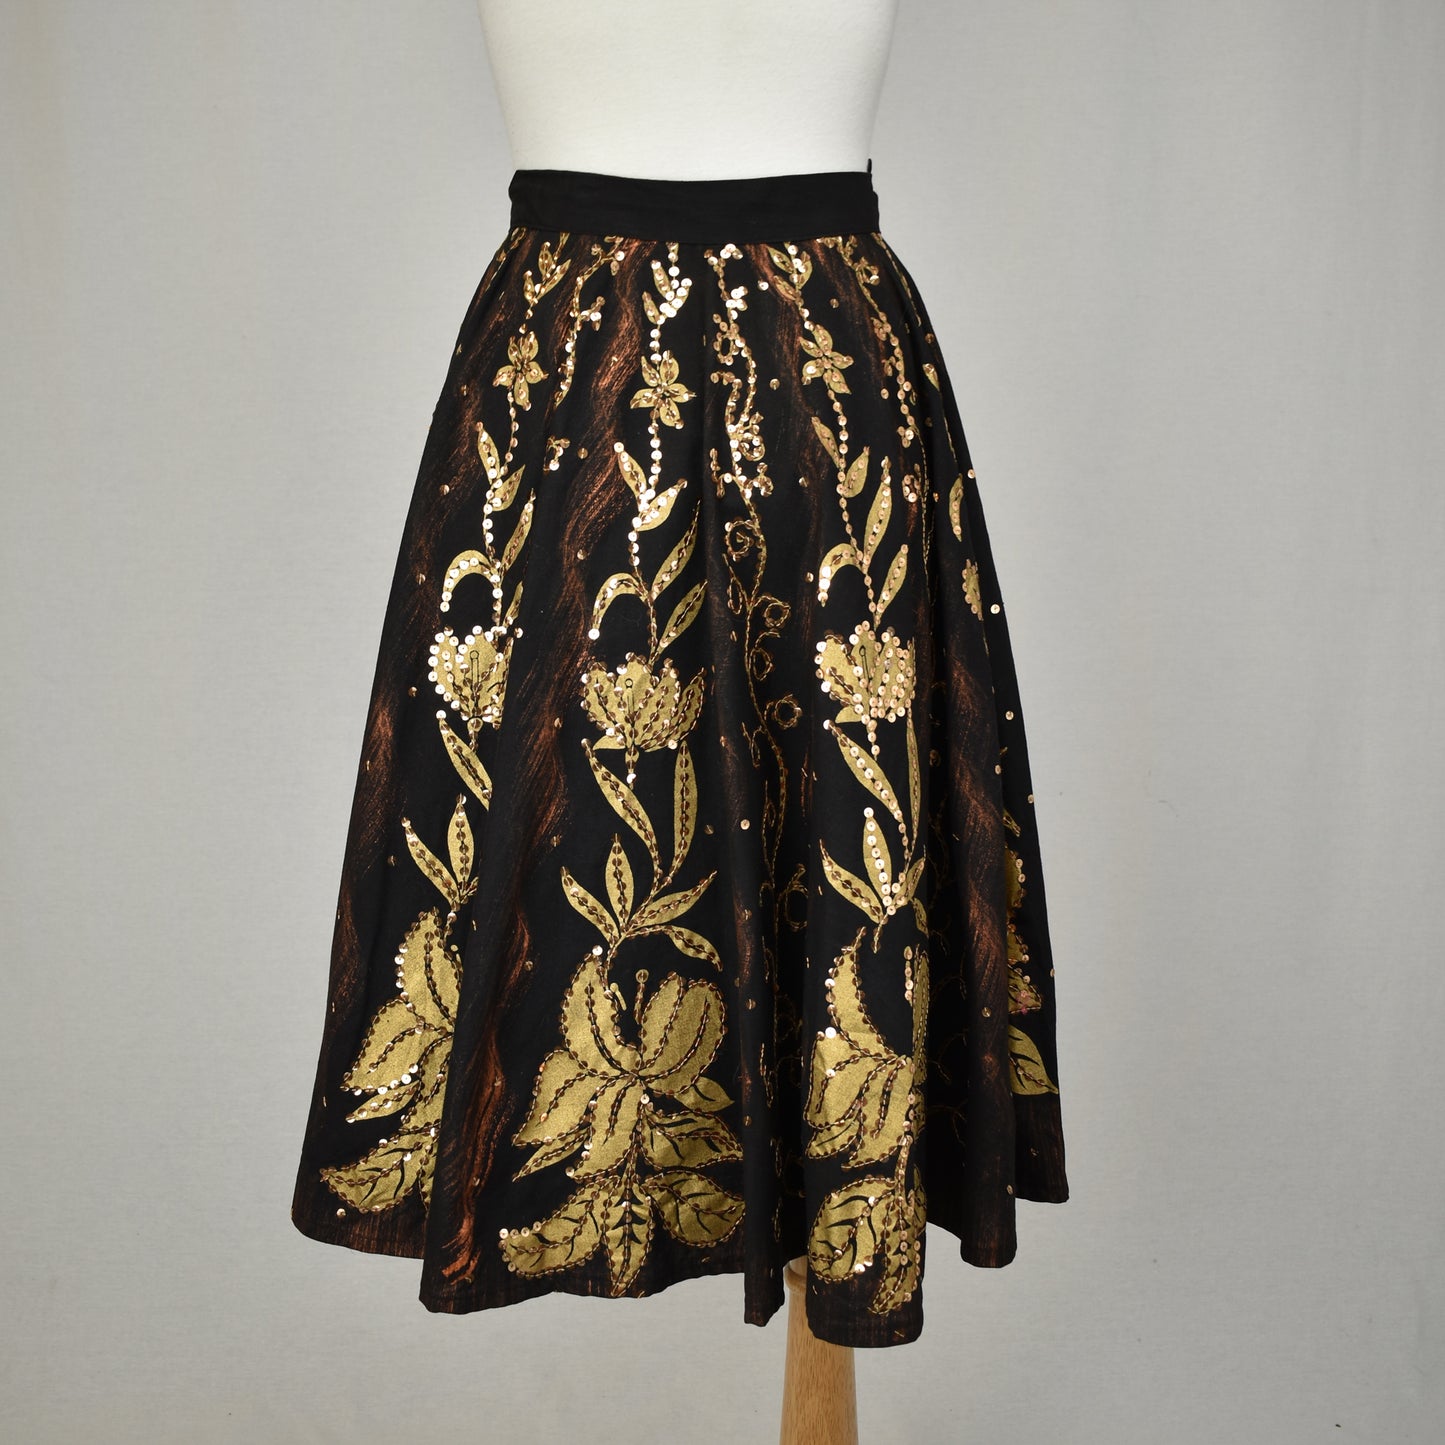 Vintage 50s Hand Painted Mexican Tourist Skirt - Black with Gold Sequins - Full Circle - Gold and Bronze Shimmering Paint